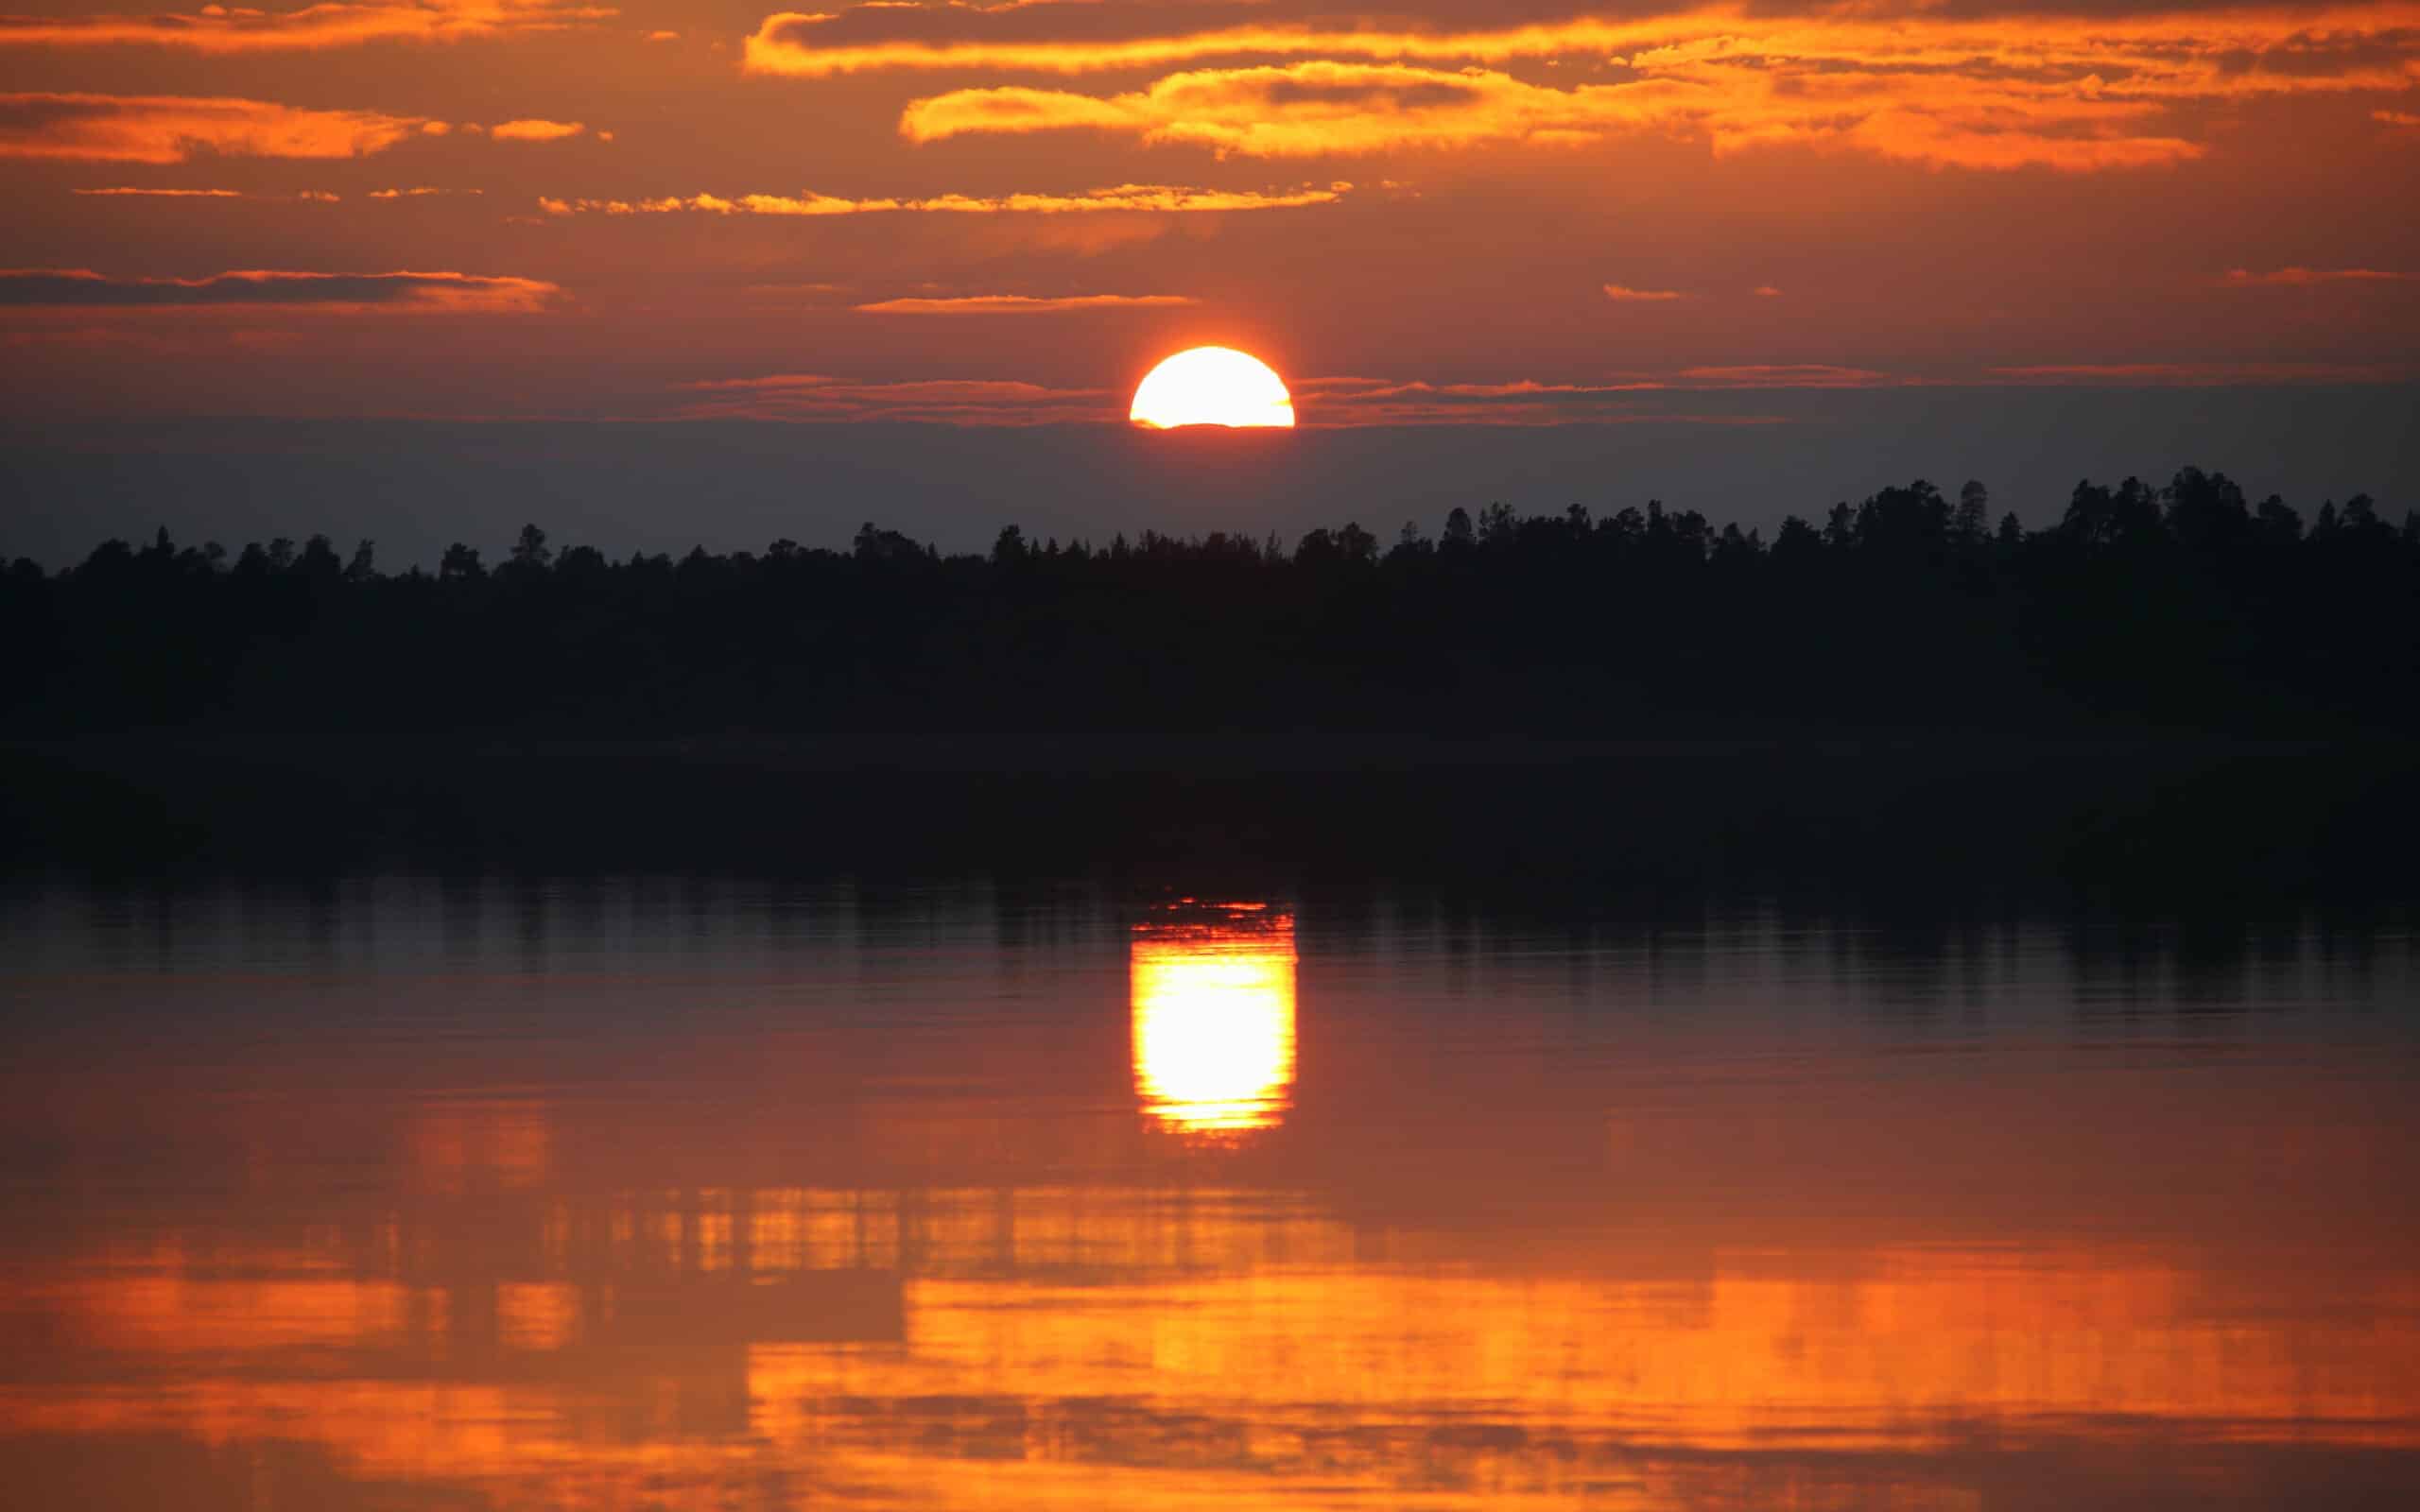 midnight sun with water reflection at lake inari in finland